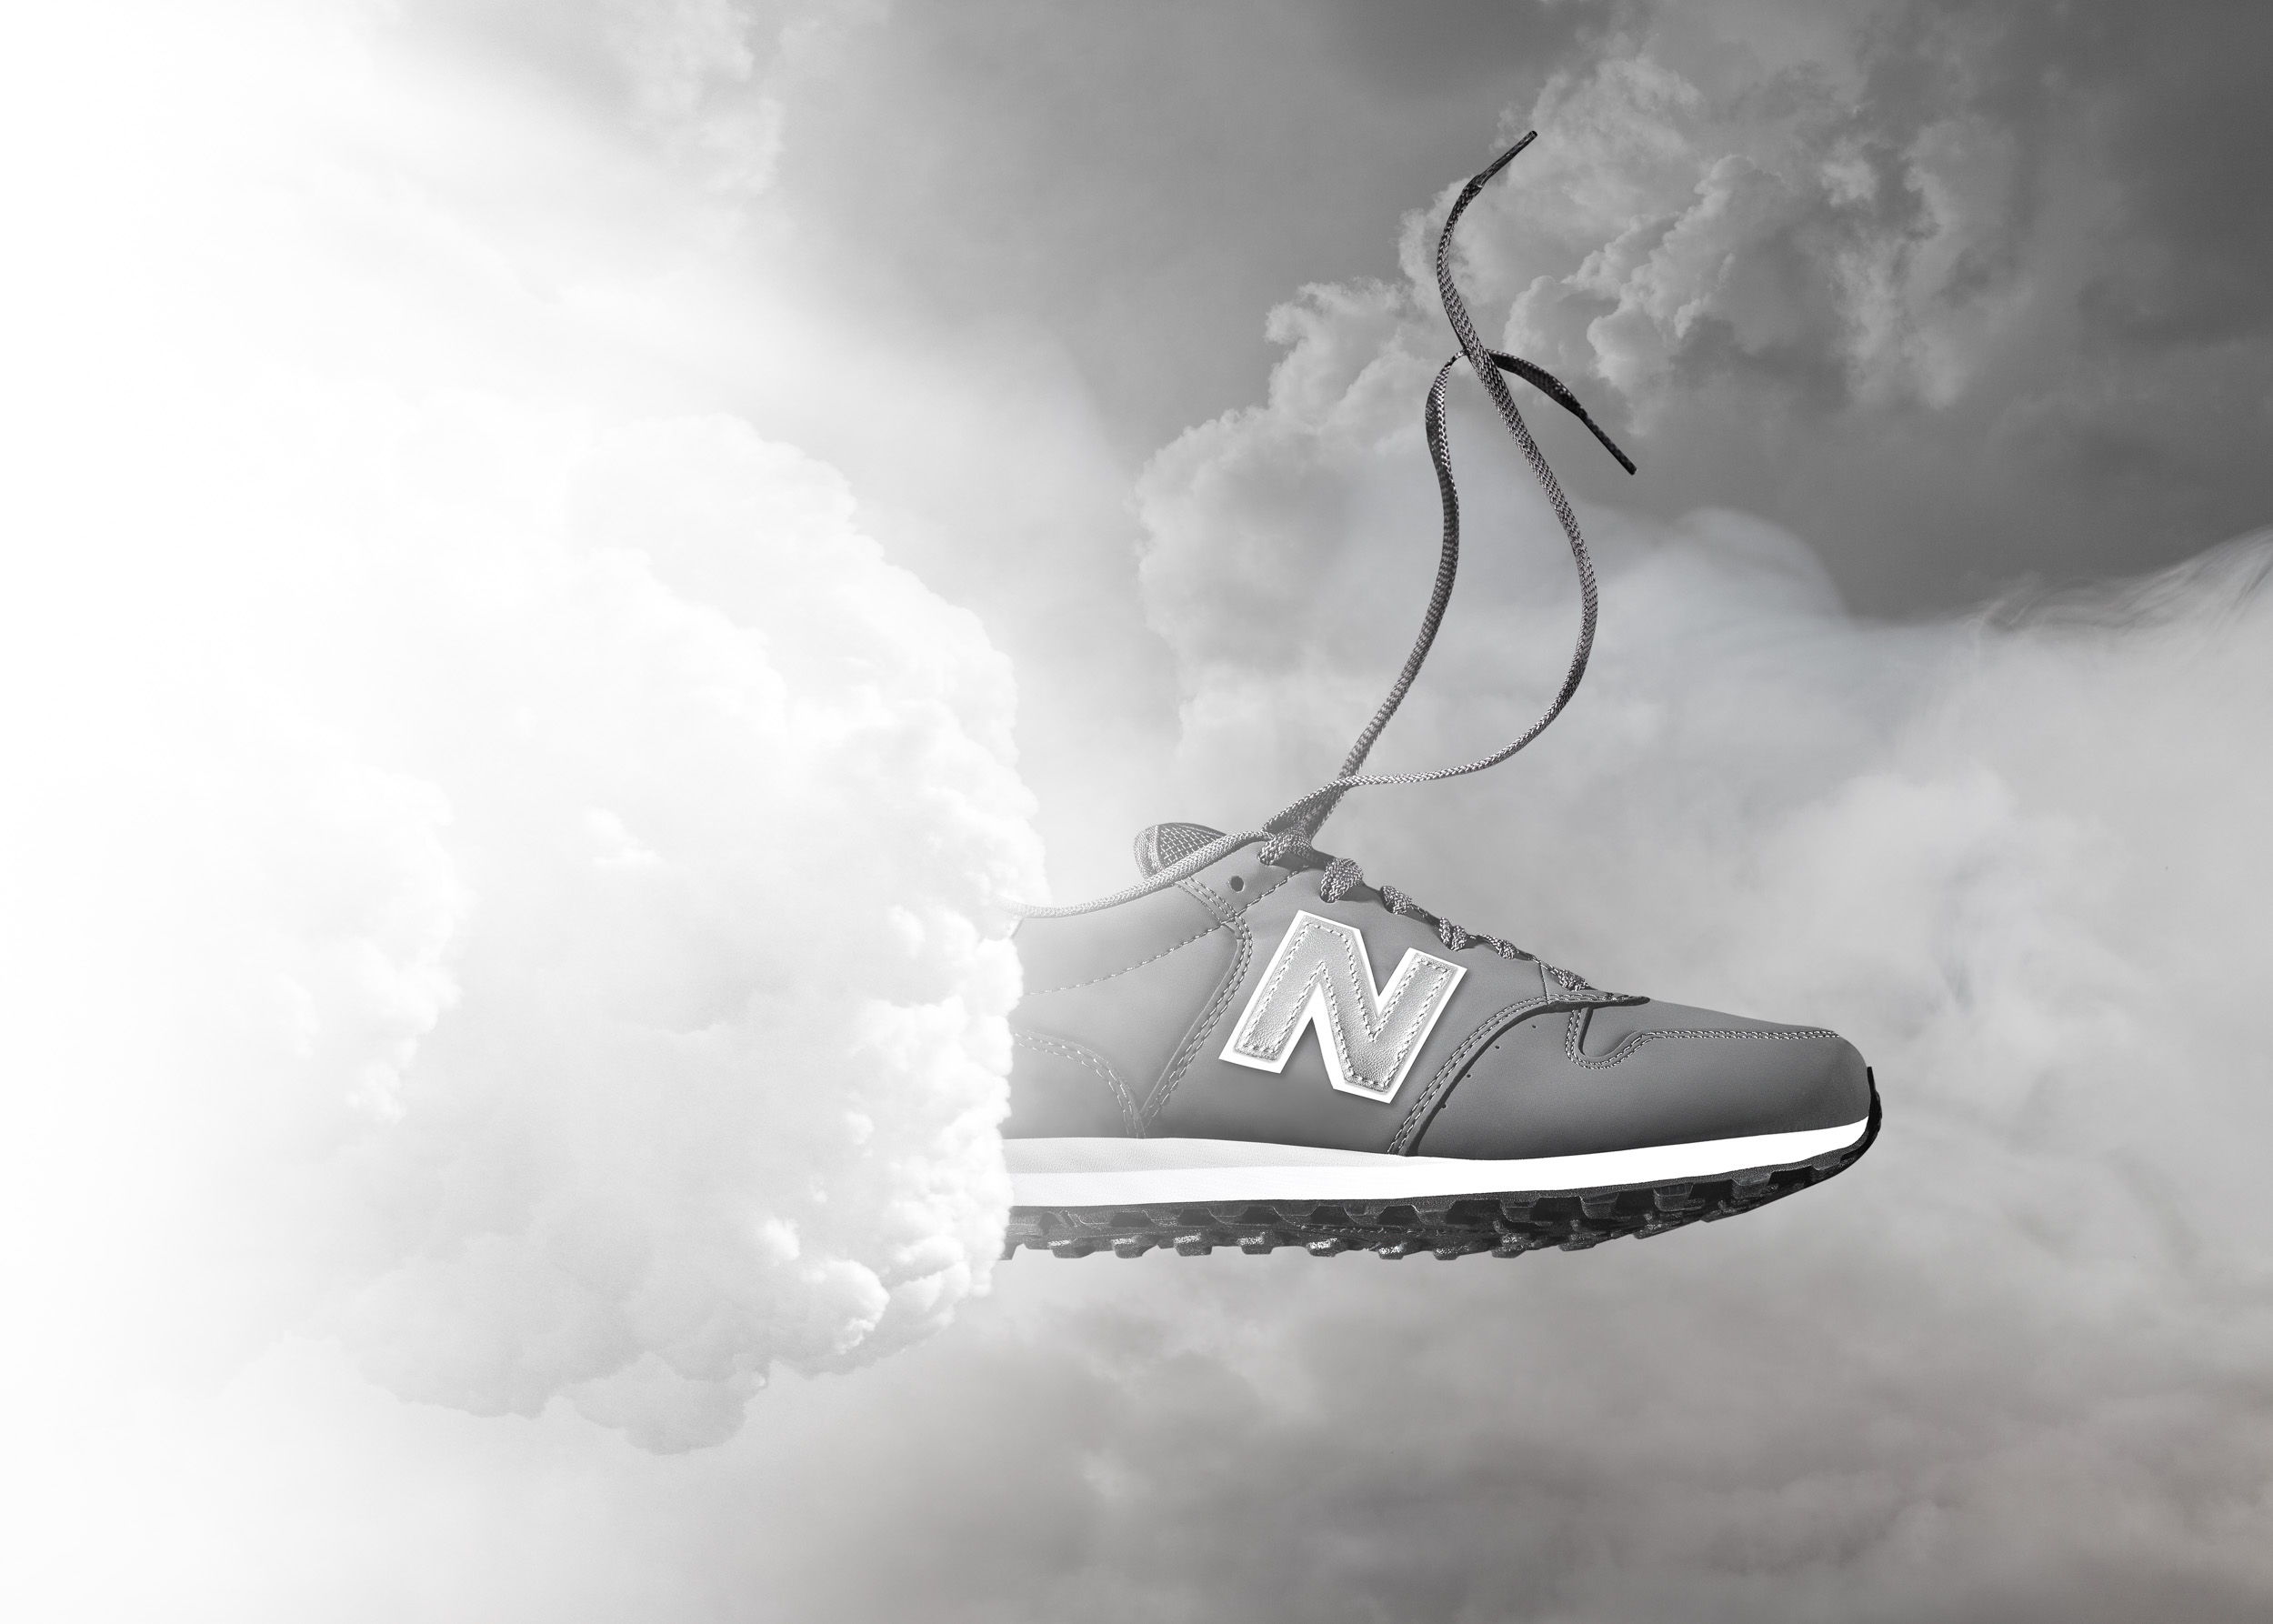 New Balance Trainers Greyscale | Commercial Product Shot 